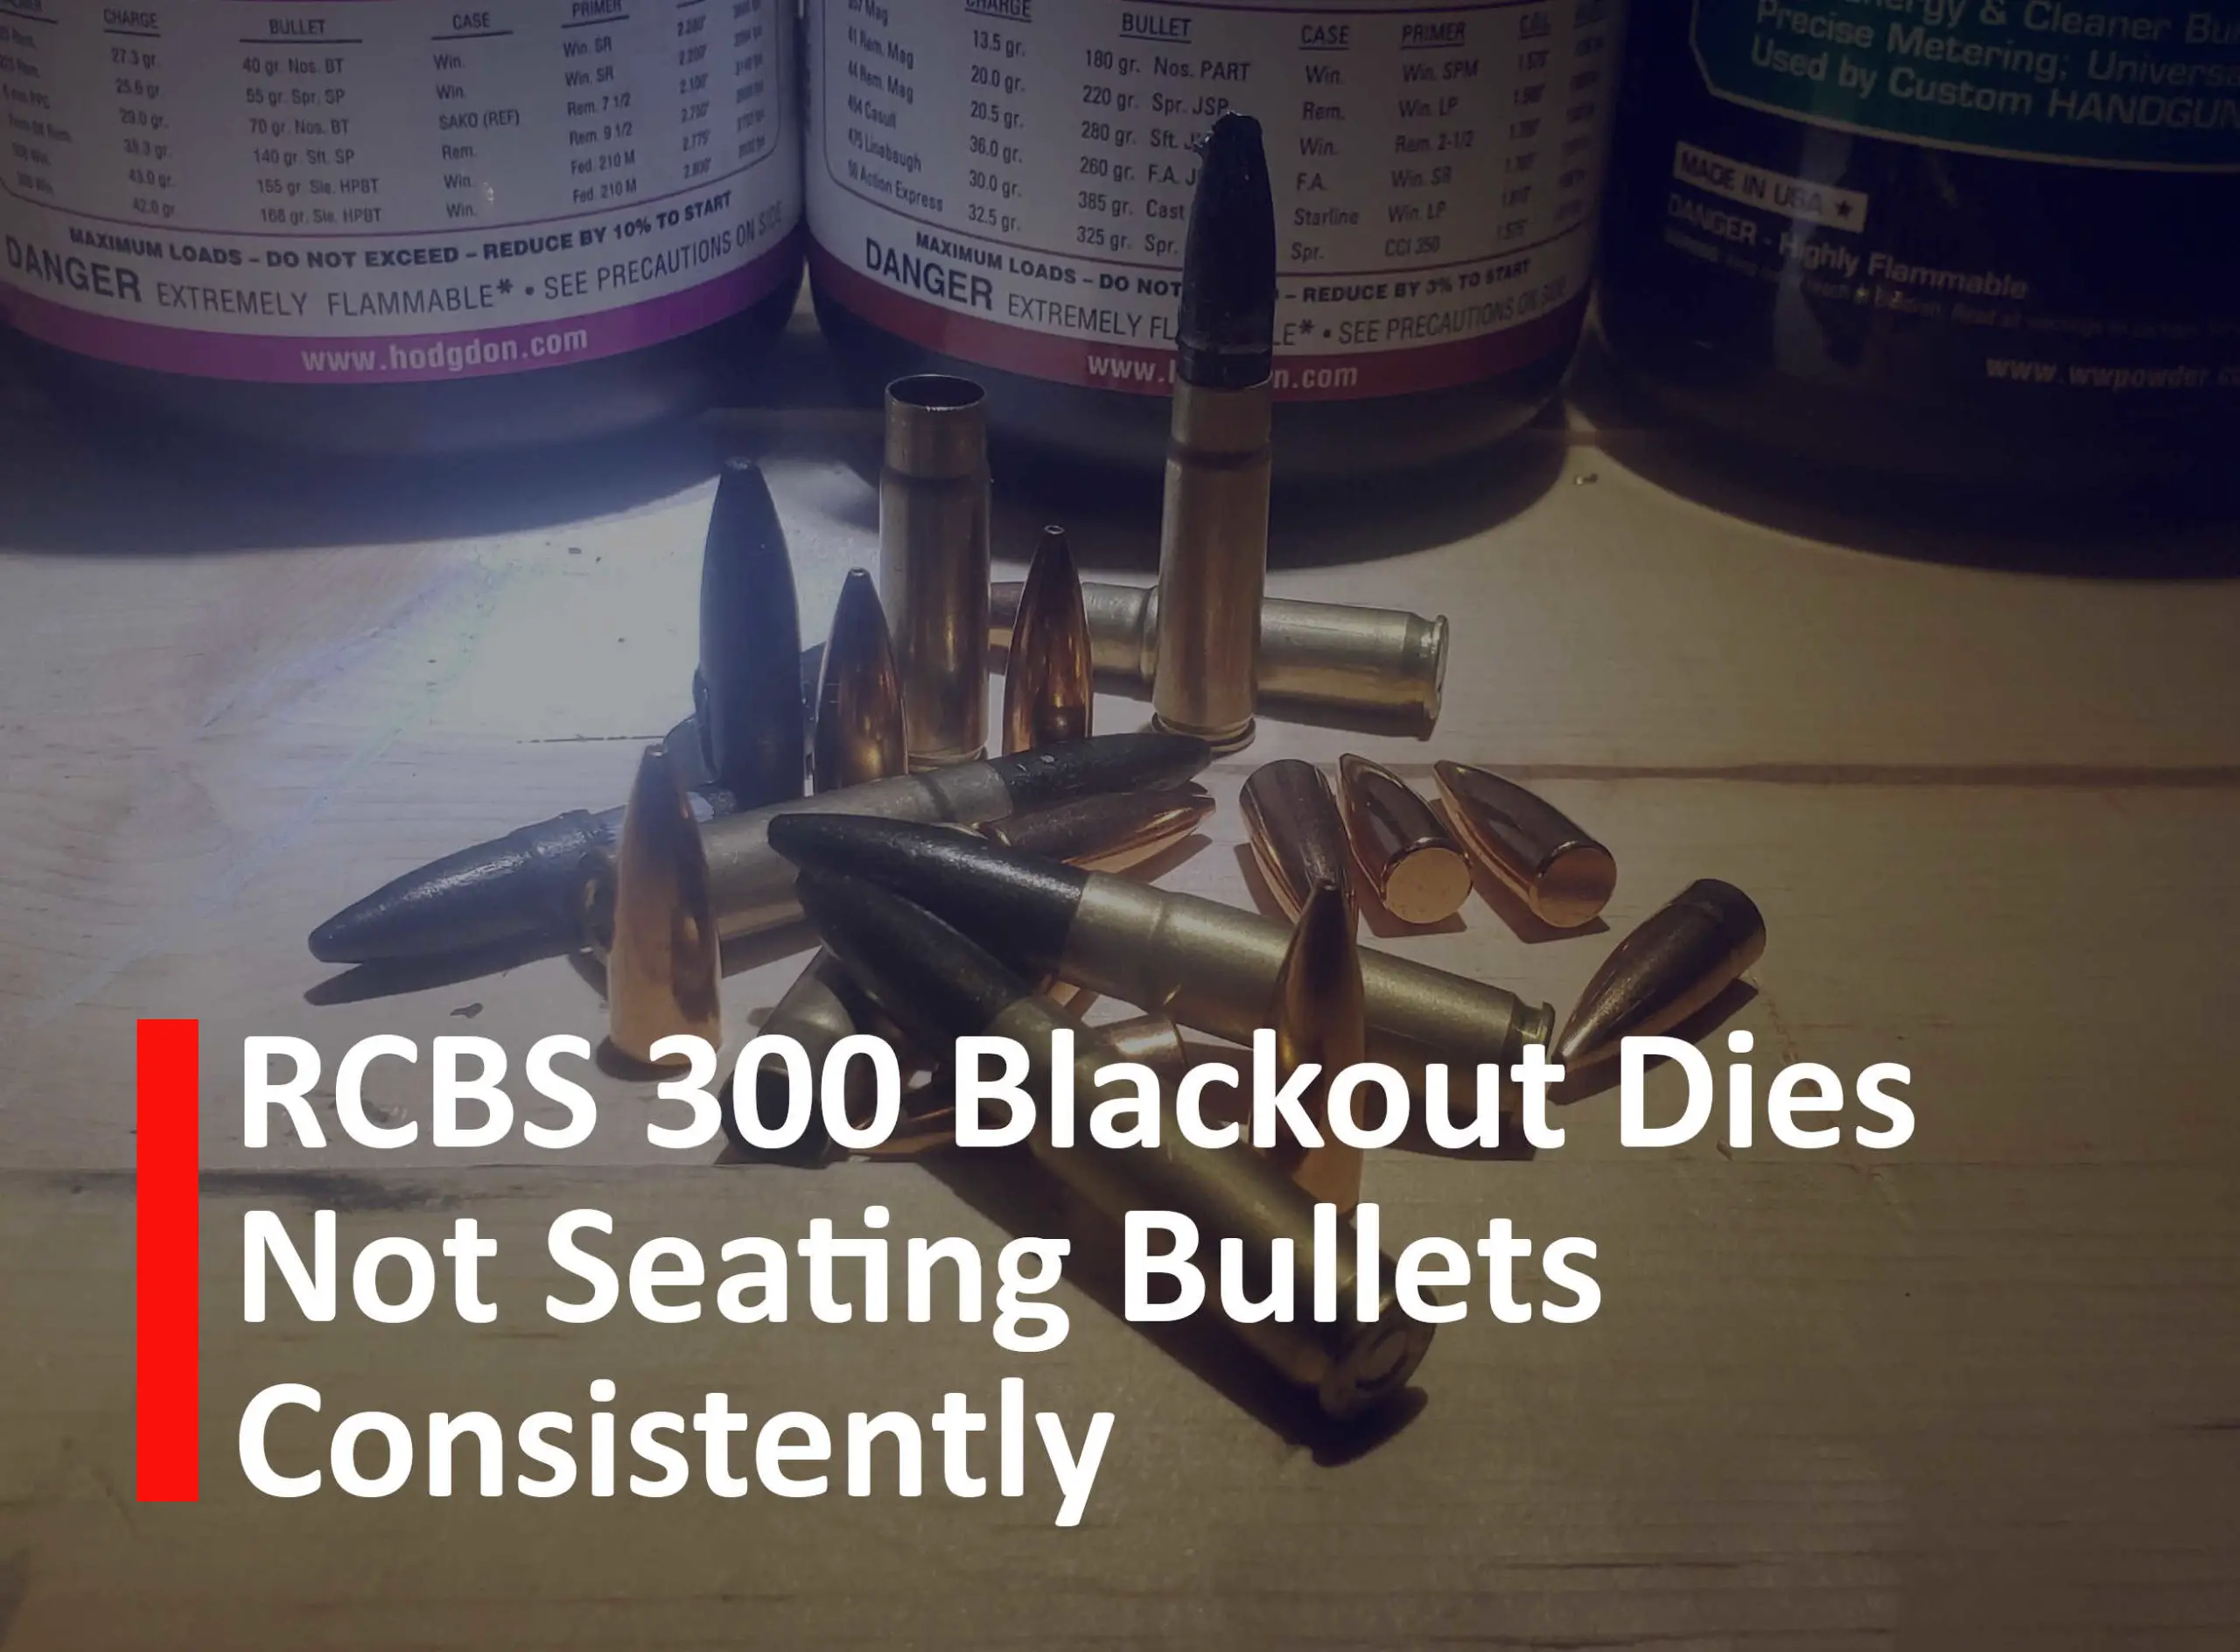 RCBS 300 Blackout dies not seating Gallant bullets consistently